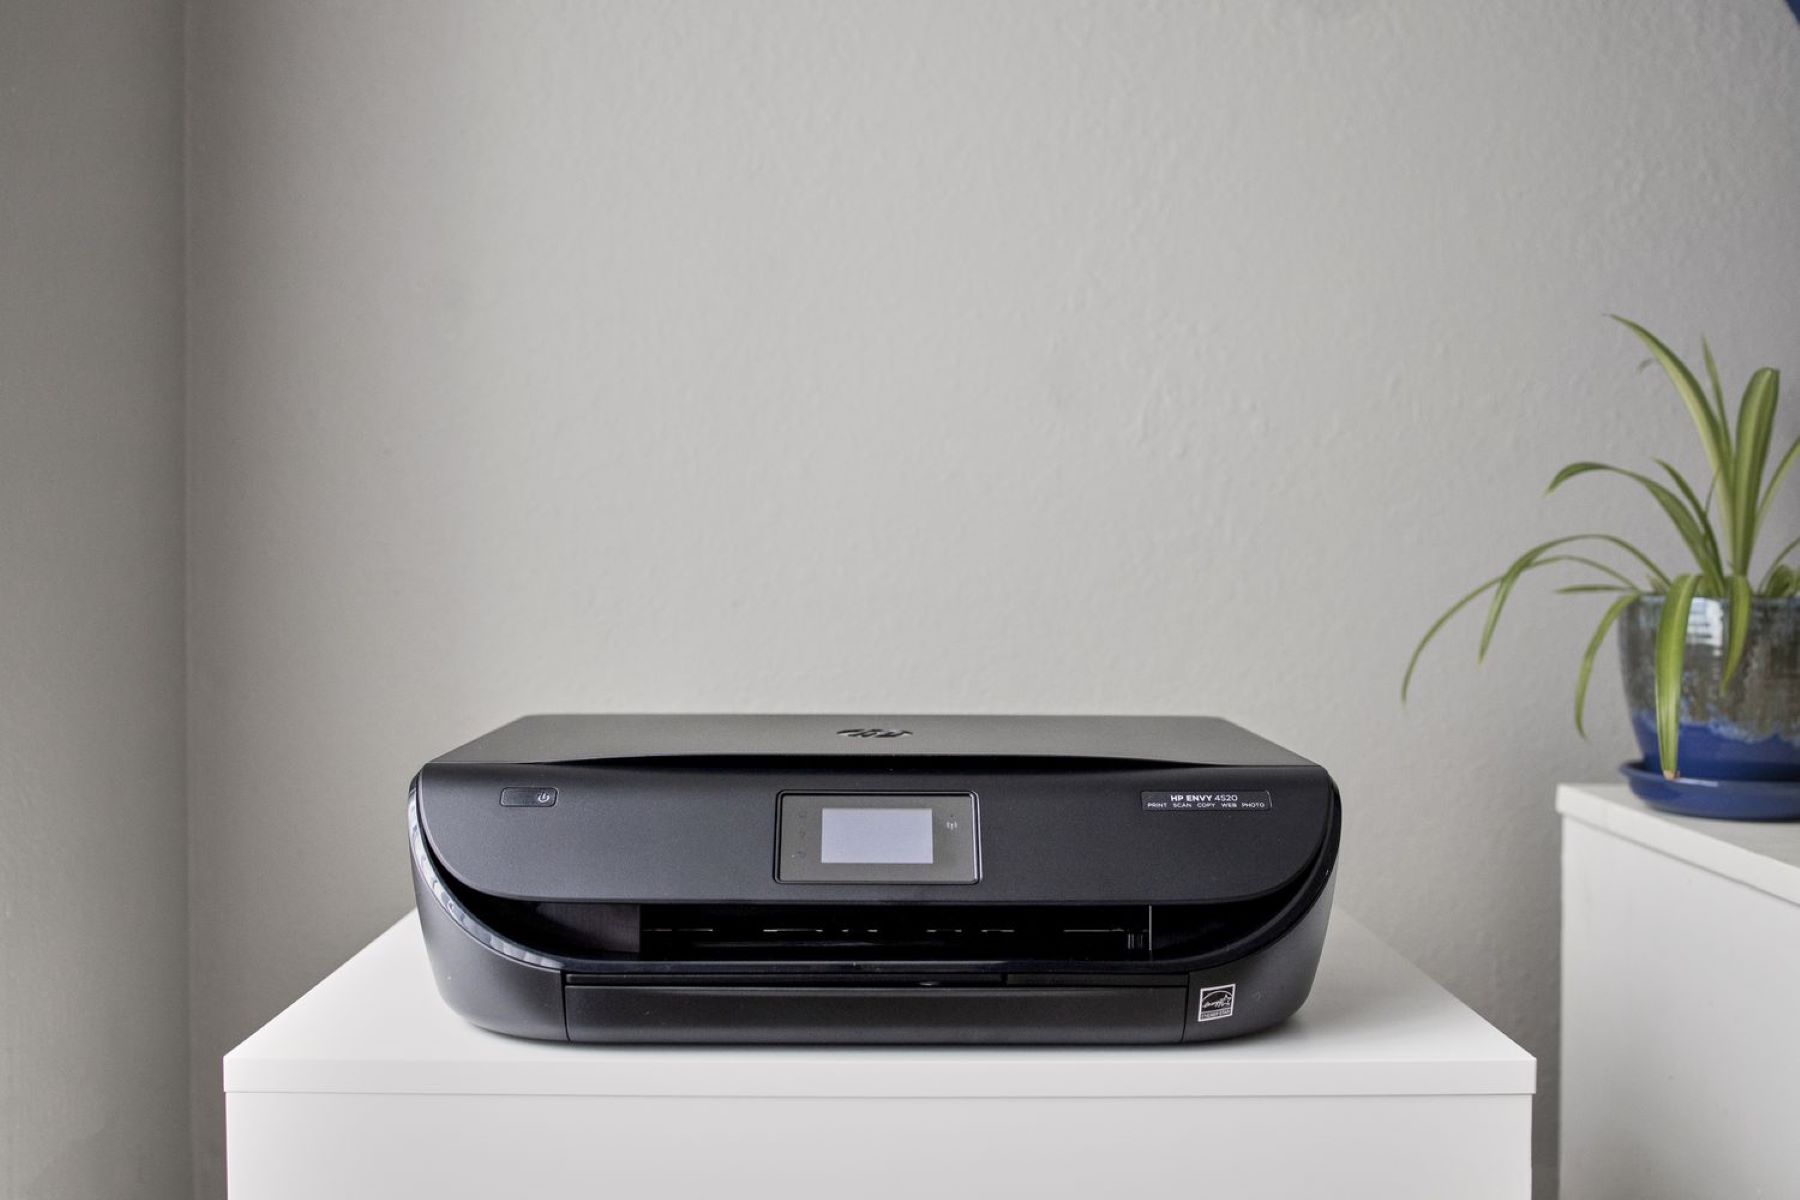 How To Connect To HP Wireless Printer